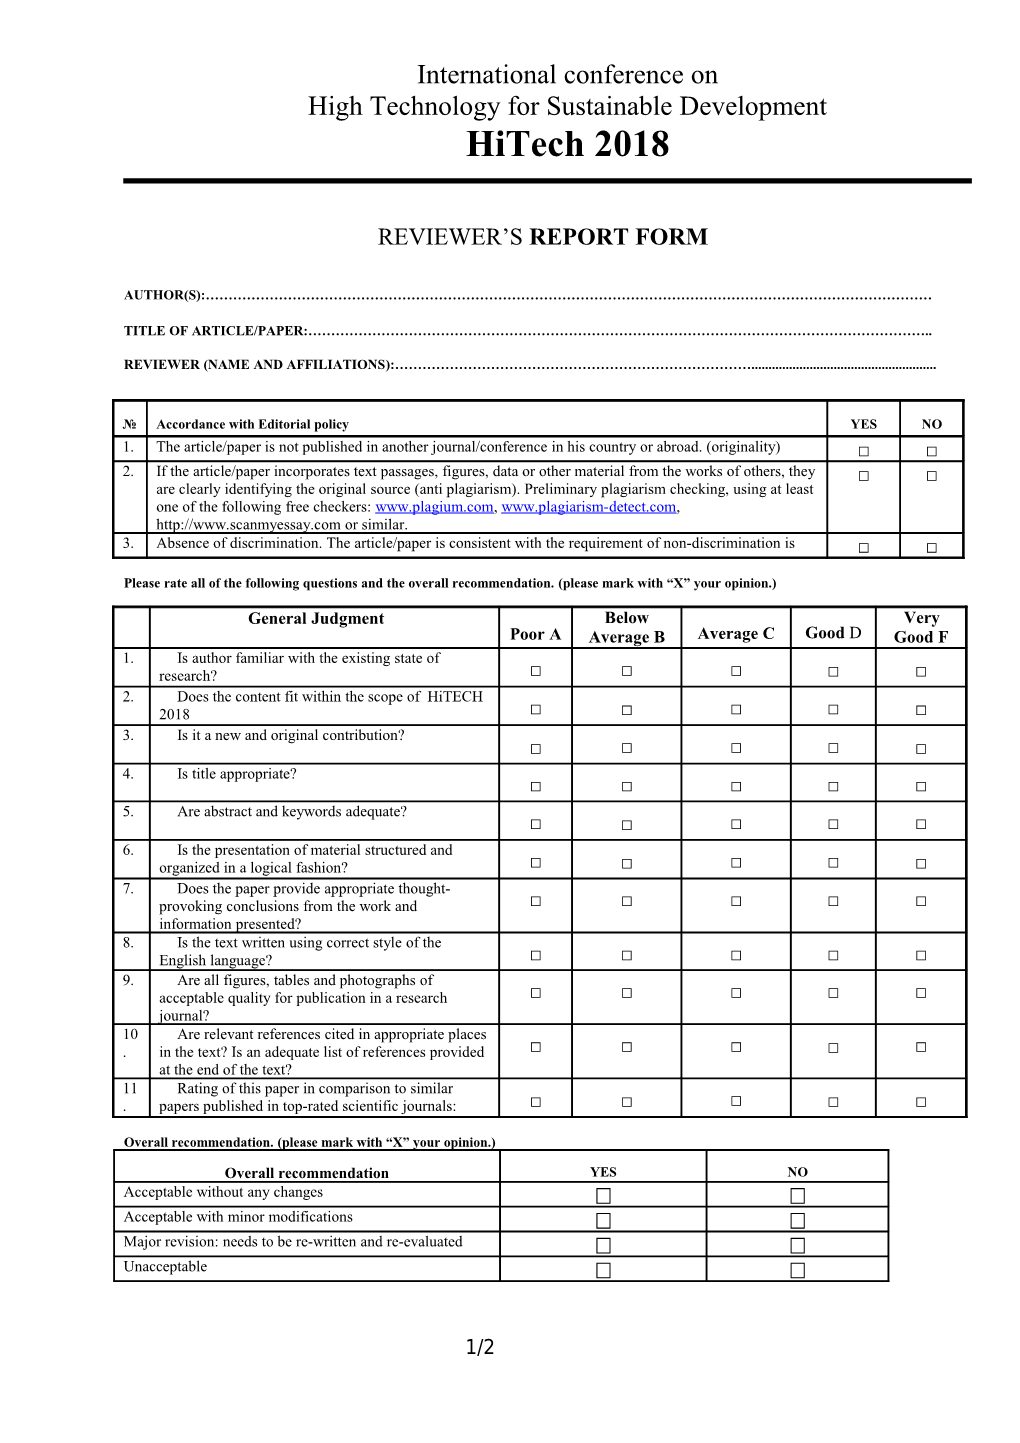 Referee's Report Form